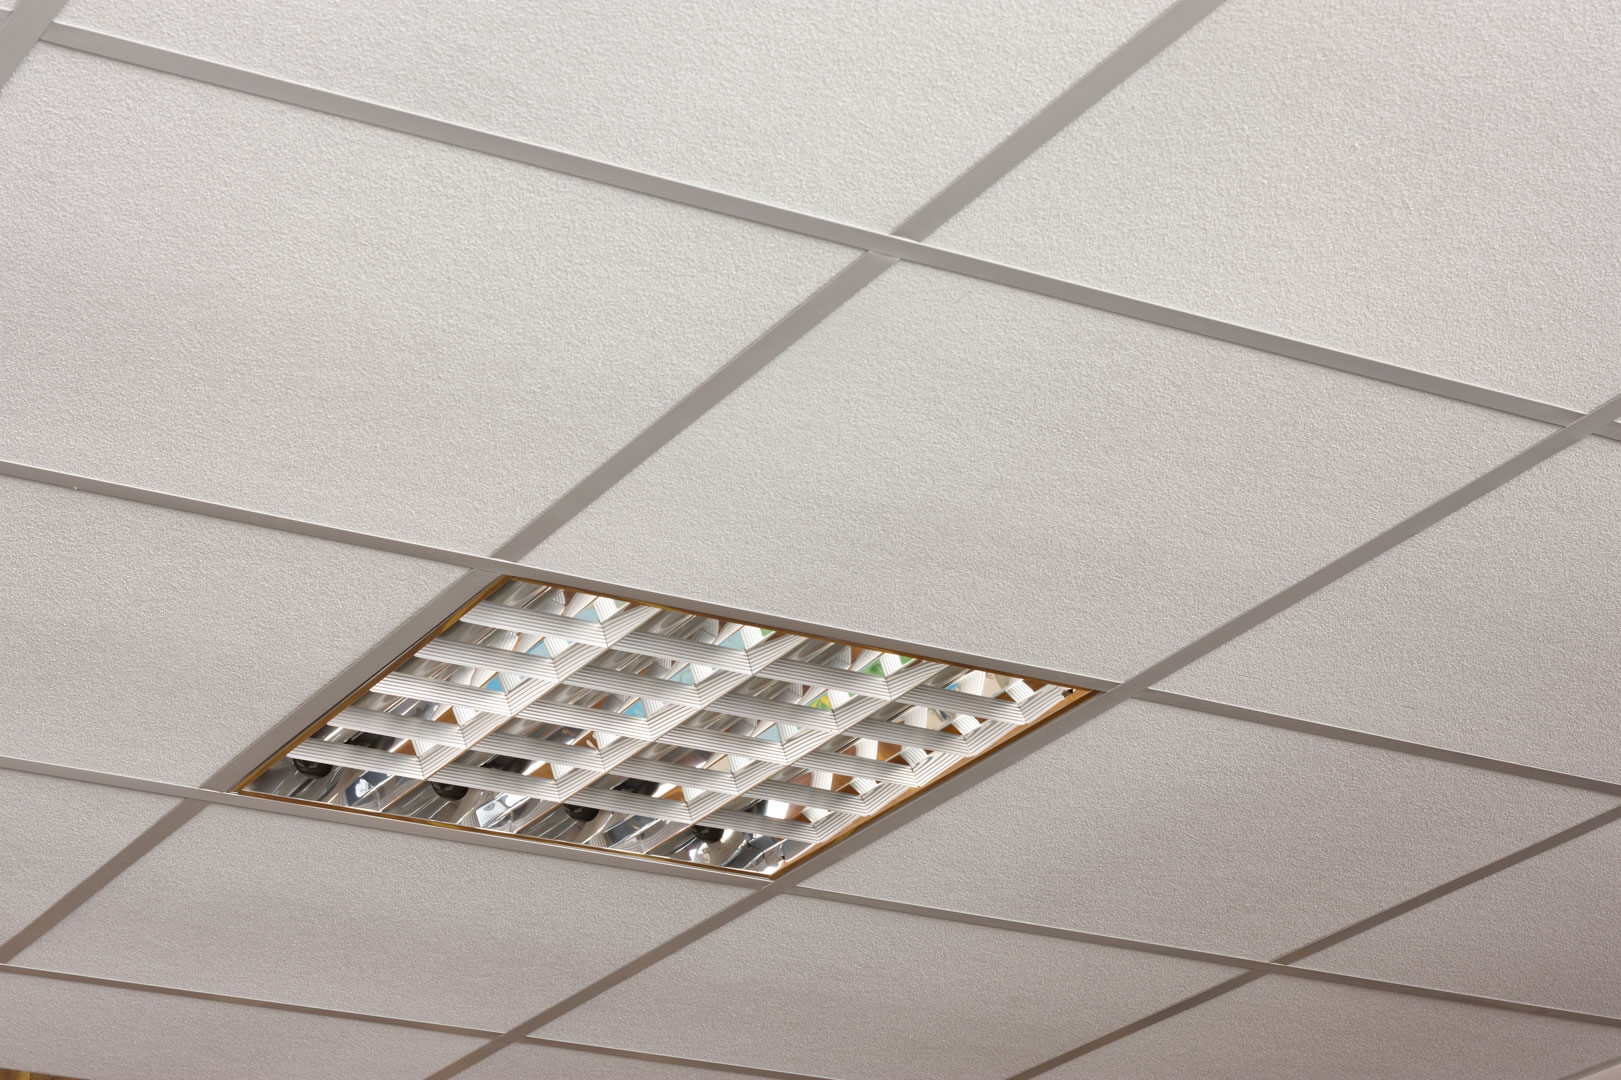 Armstrong Acoustic Suspended Ceiling Tiles Armstrong Acoustic Suspended Ceiling Tiles ceiling tiles lights accessories a leading uk supplier of 1621 X 1080